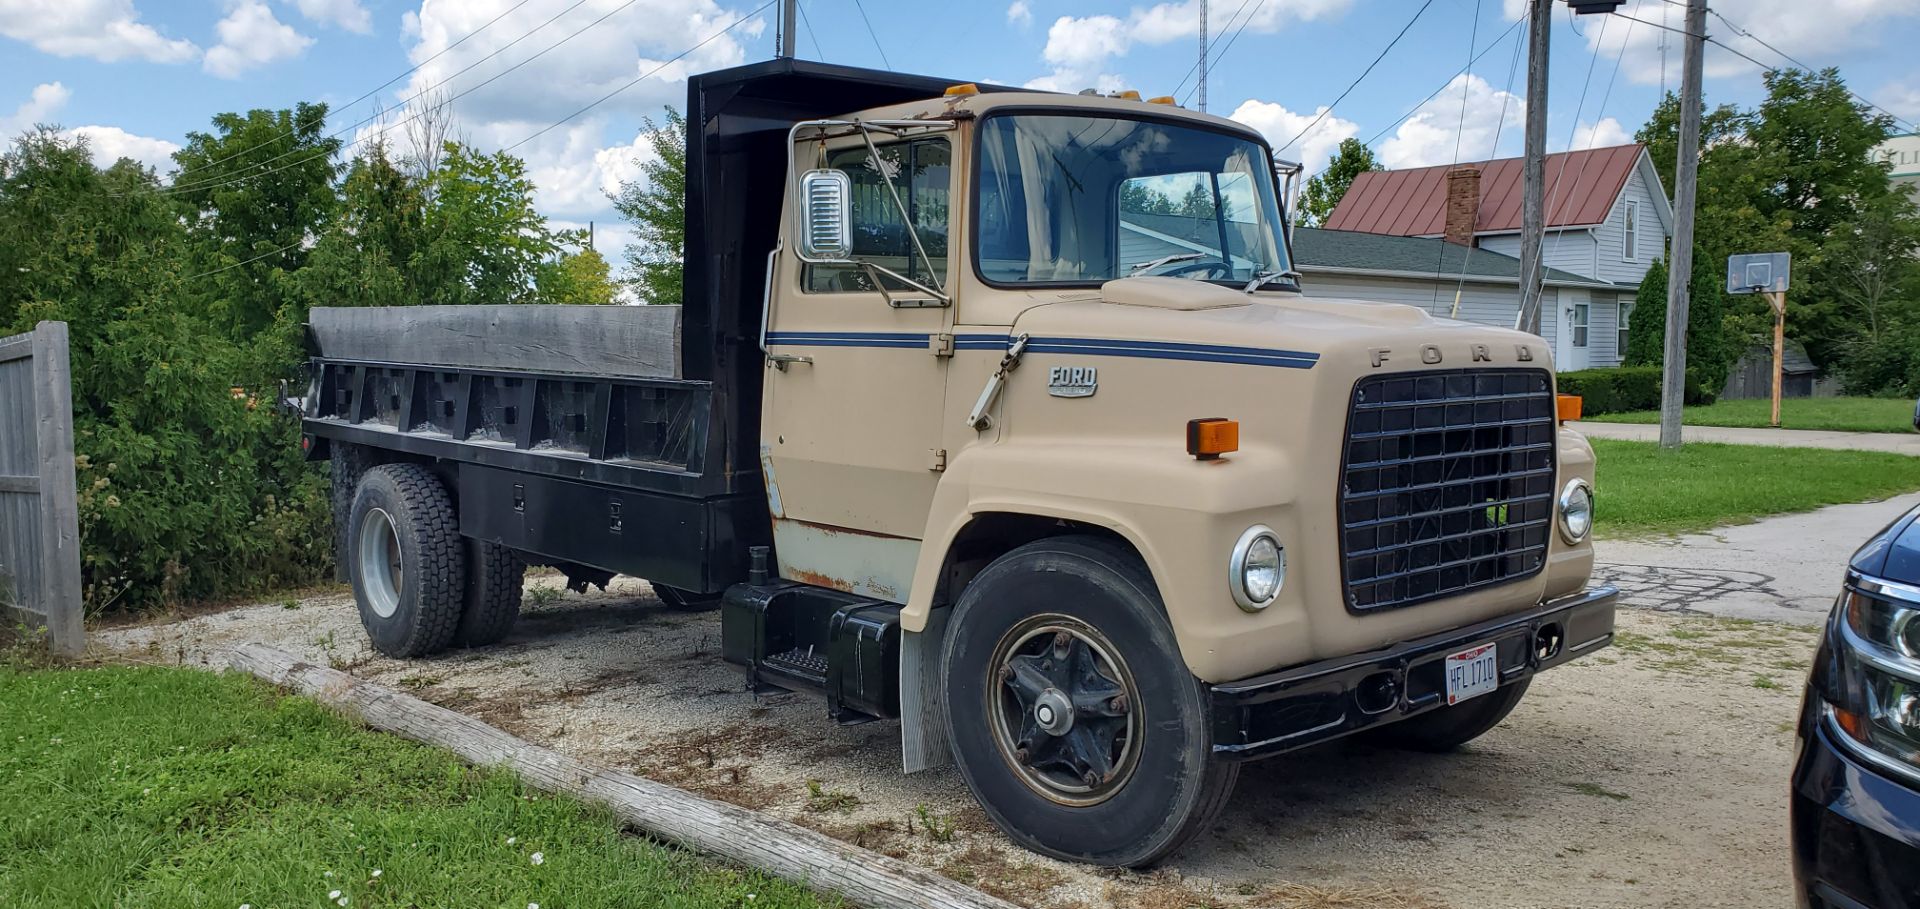 1983 Ford 7000, 5-speed Manual Transmission, Caterpillar 3208 Diesel, 14" Dump Bed,UR 225 Tires, New - Image 2 of 25